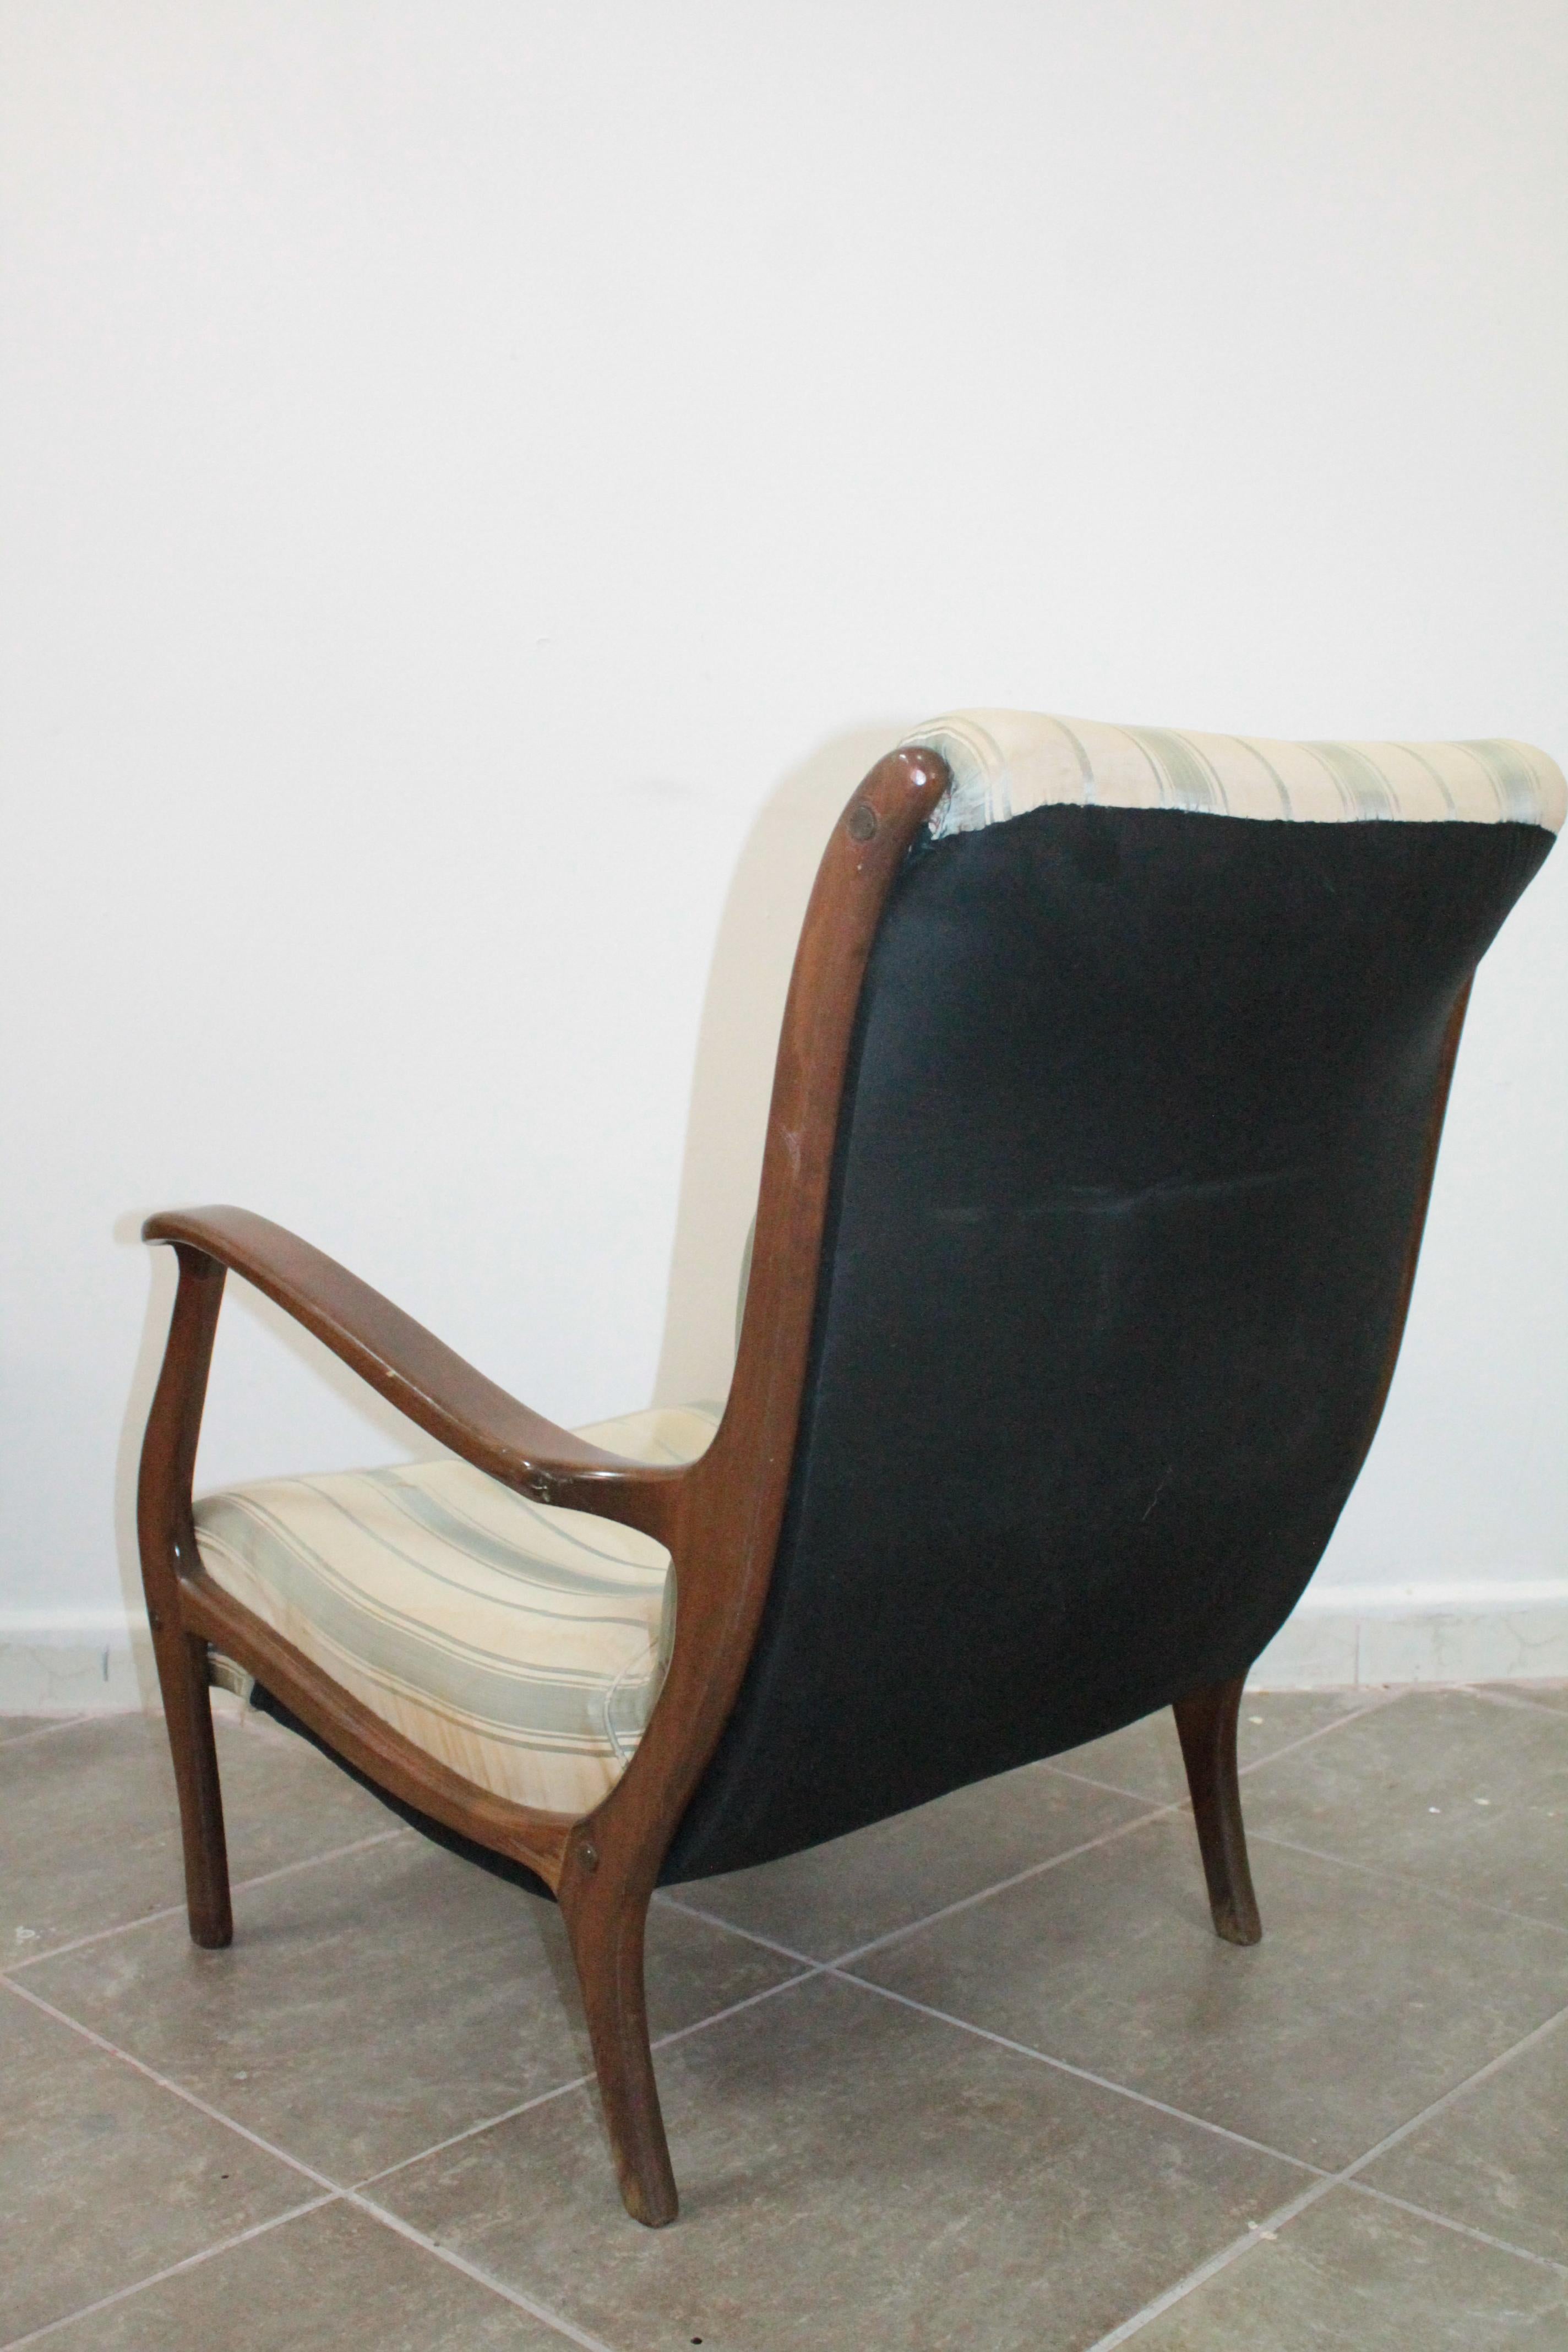 Mid-20th Century Vintage Ezio Longhi for Elam Lounge Chairs Wood, 1950s For Sale